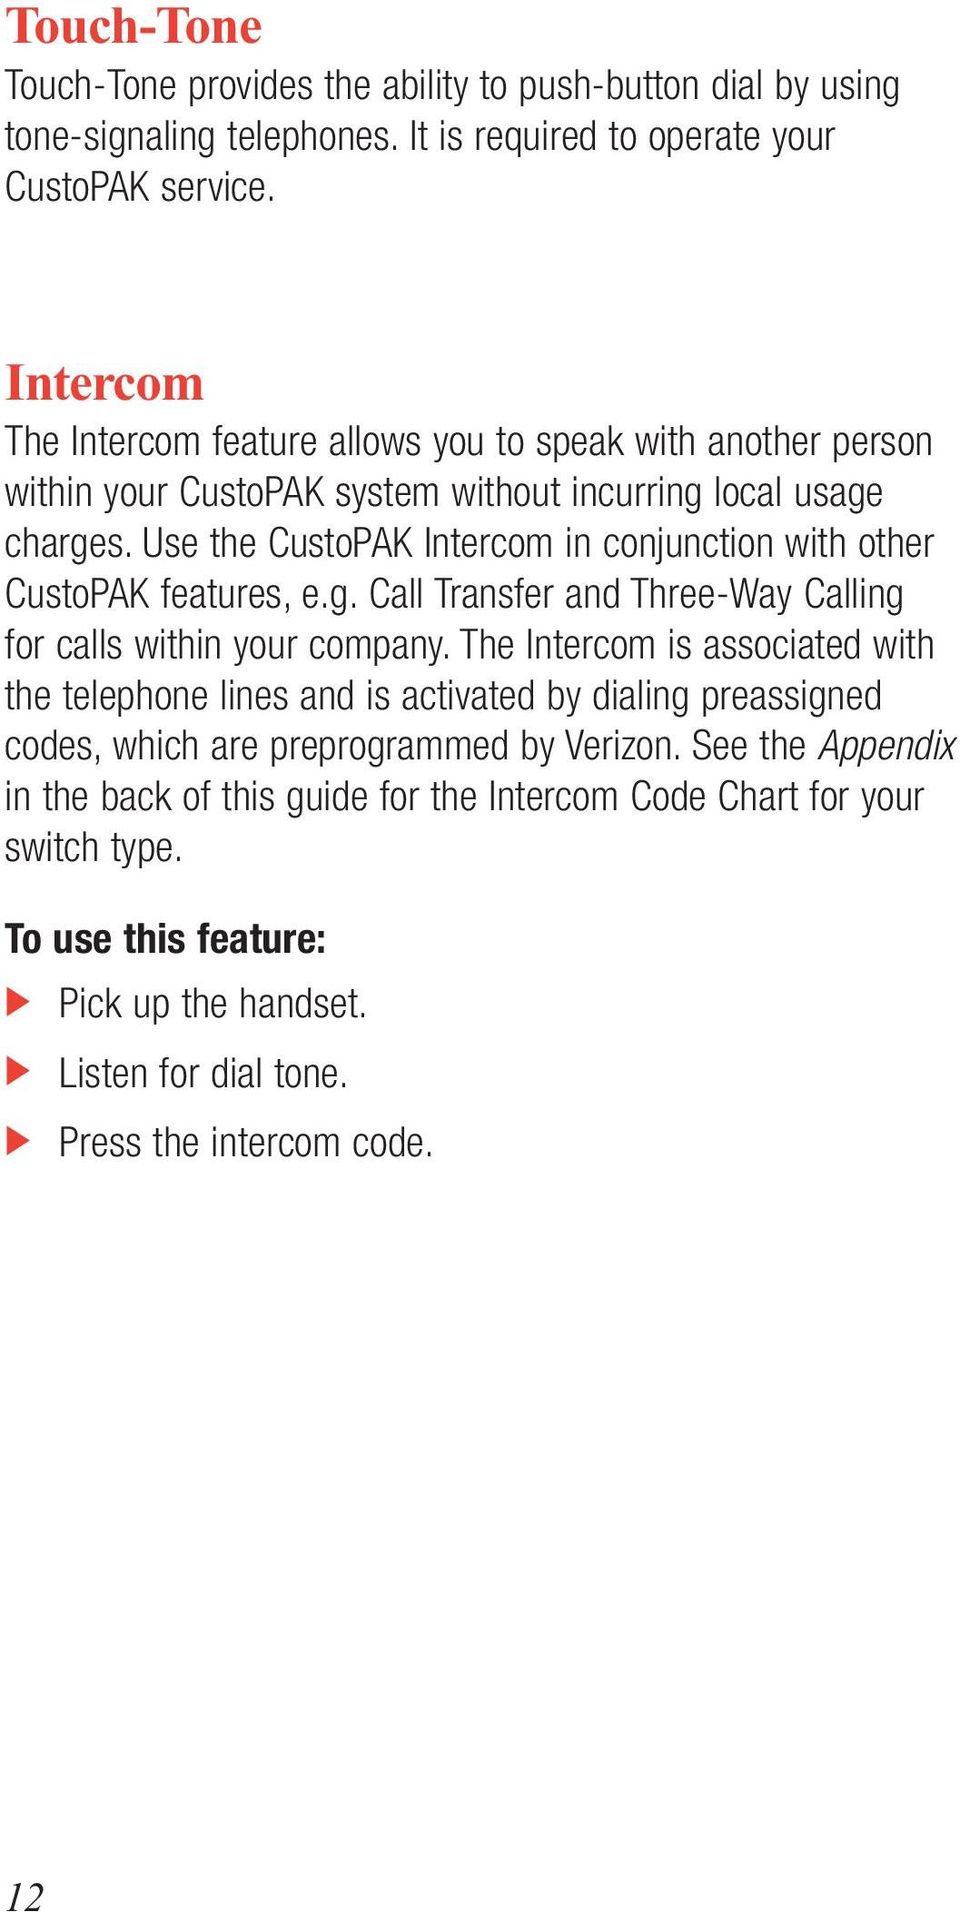 Use the CustoPAK Intercom in conjunction with other CustoPAK features, e.g. Call Transfer and Three-Way Calling for calls within your company.